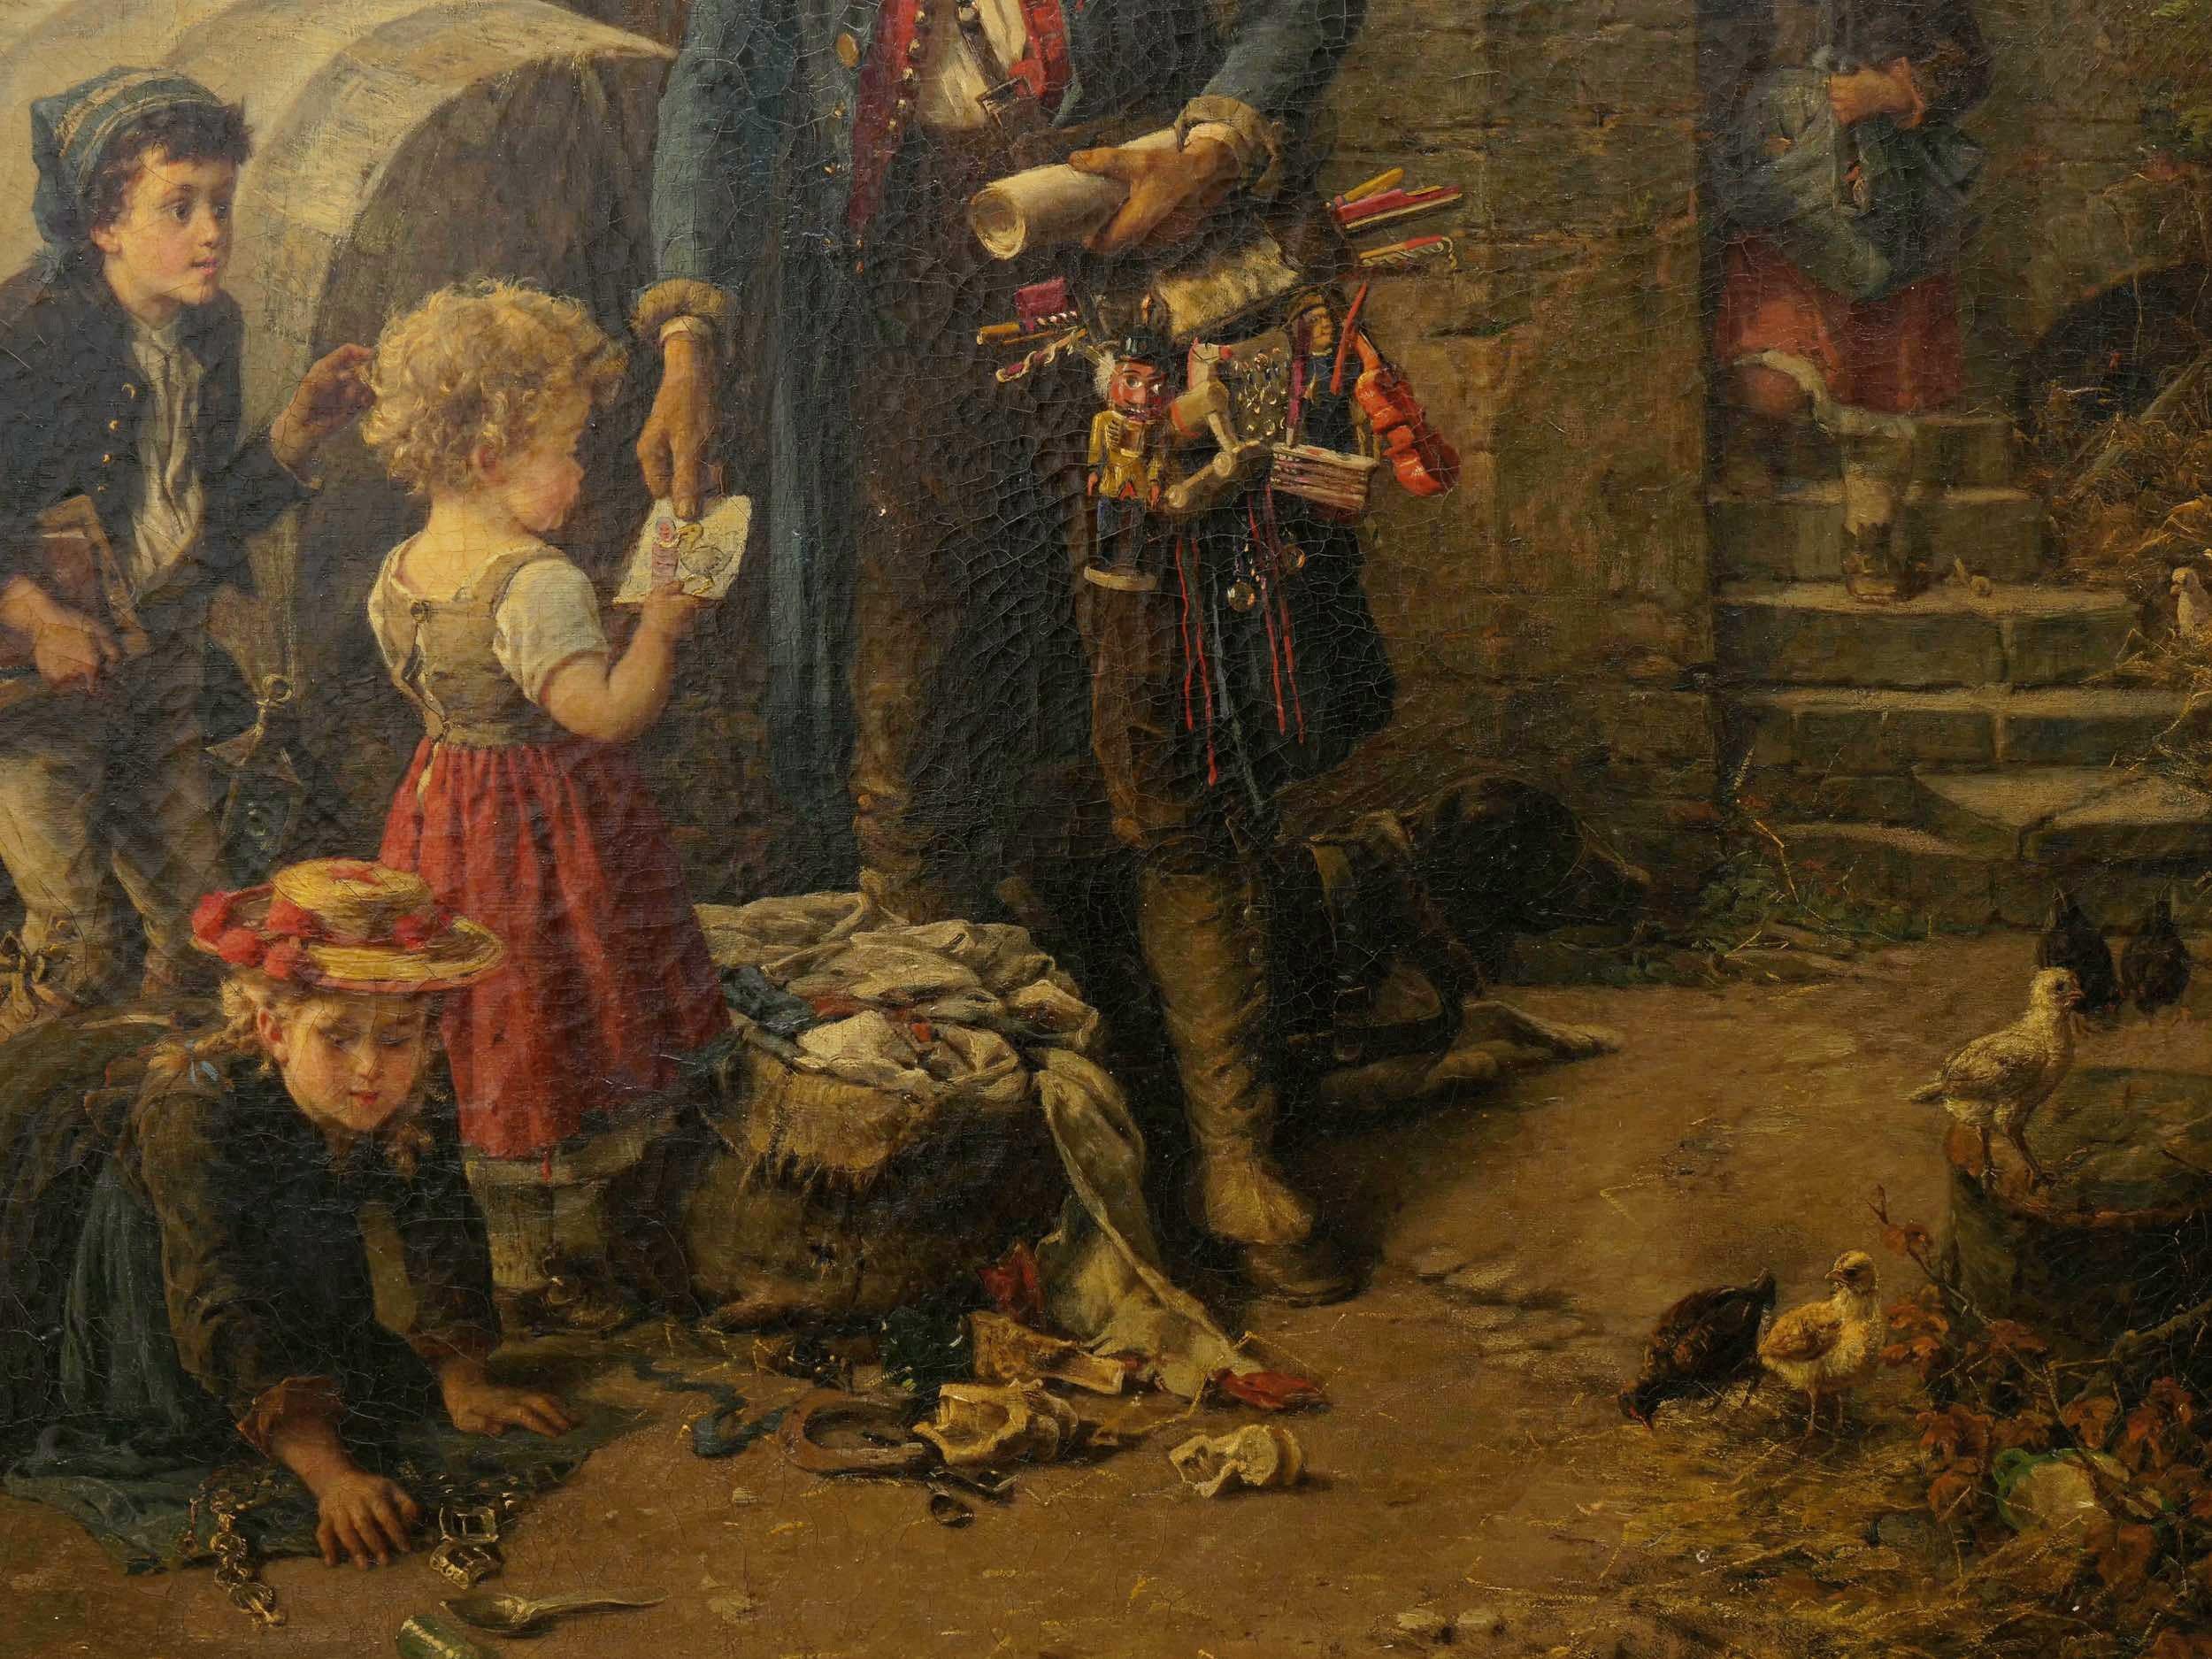 19th Century “The Toy Seller” (1874) Antique Oil Painting by Fritz Beinke (German, 1842-1907